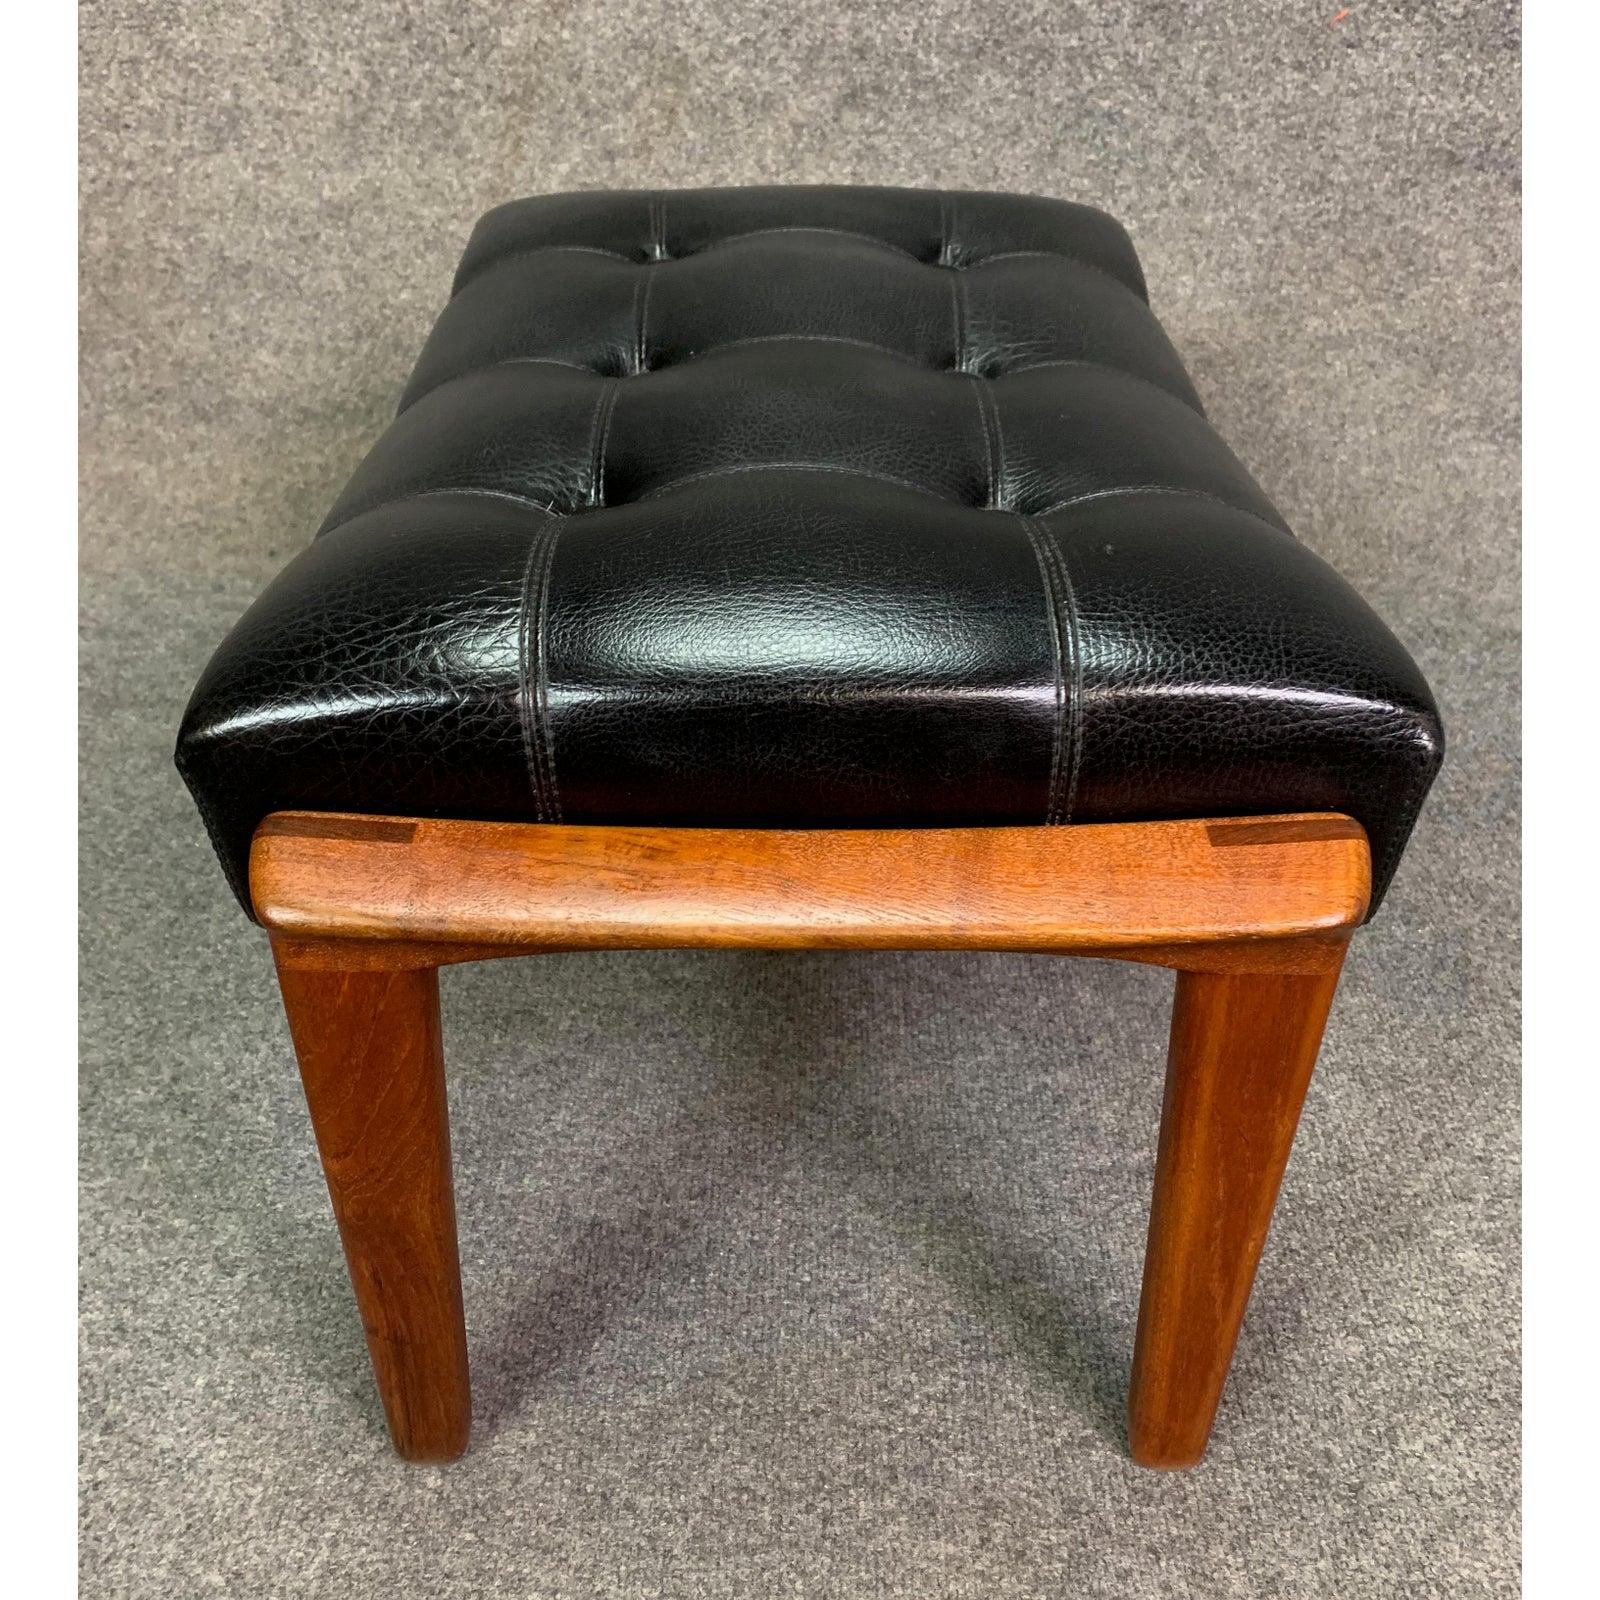 Here is a sculptural Scandinavian Modern foot stool in teak and Naugahyde manufactured by Broderna Andersson in Sweden in the 1960s.
This beautiful ottoman features a restored solid teak frame with vibrant wood grain and an all original tufted pad